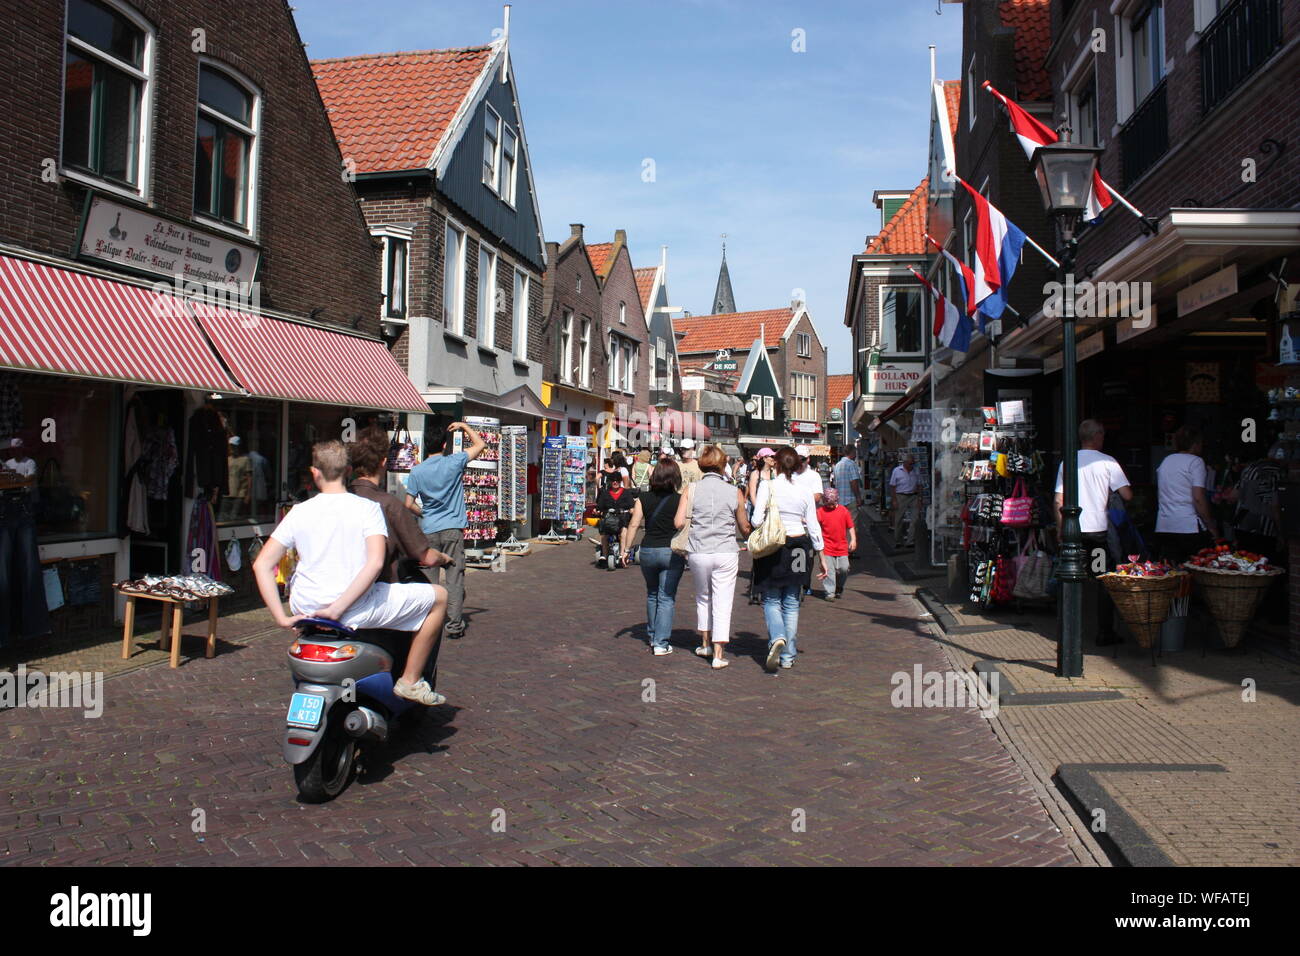 A street in Volendam village that well-preserved with traditional wooden houses, restaurants, souvenir shops and photo studios. Stock Photo